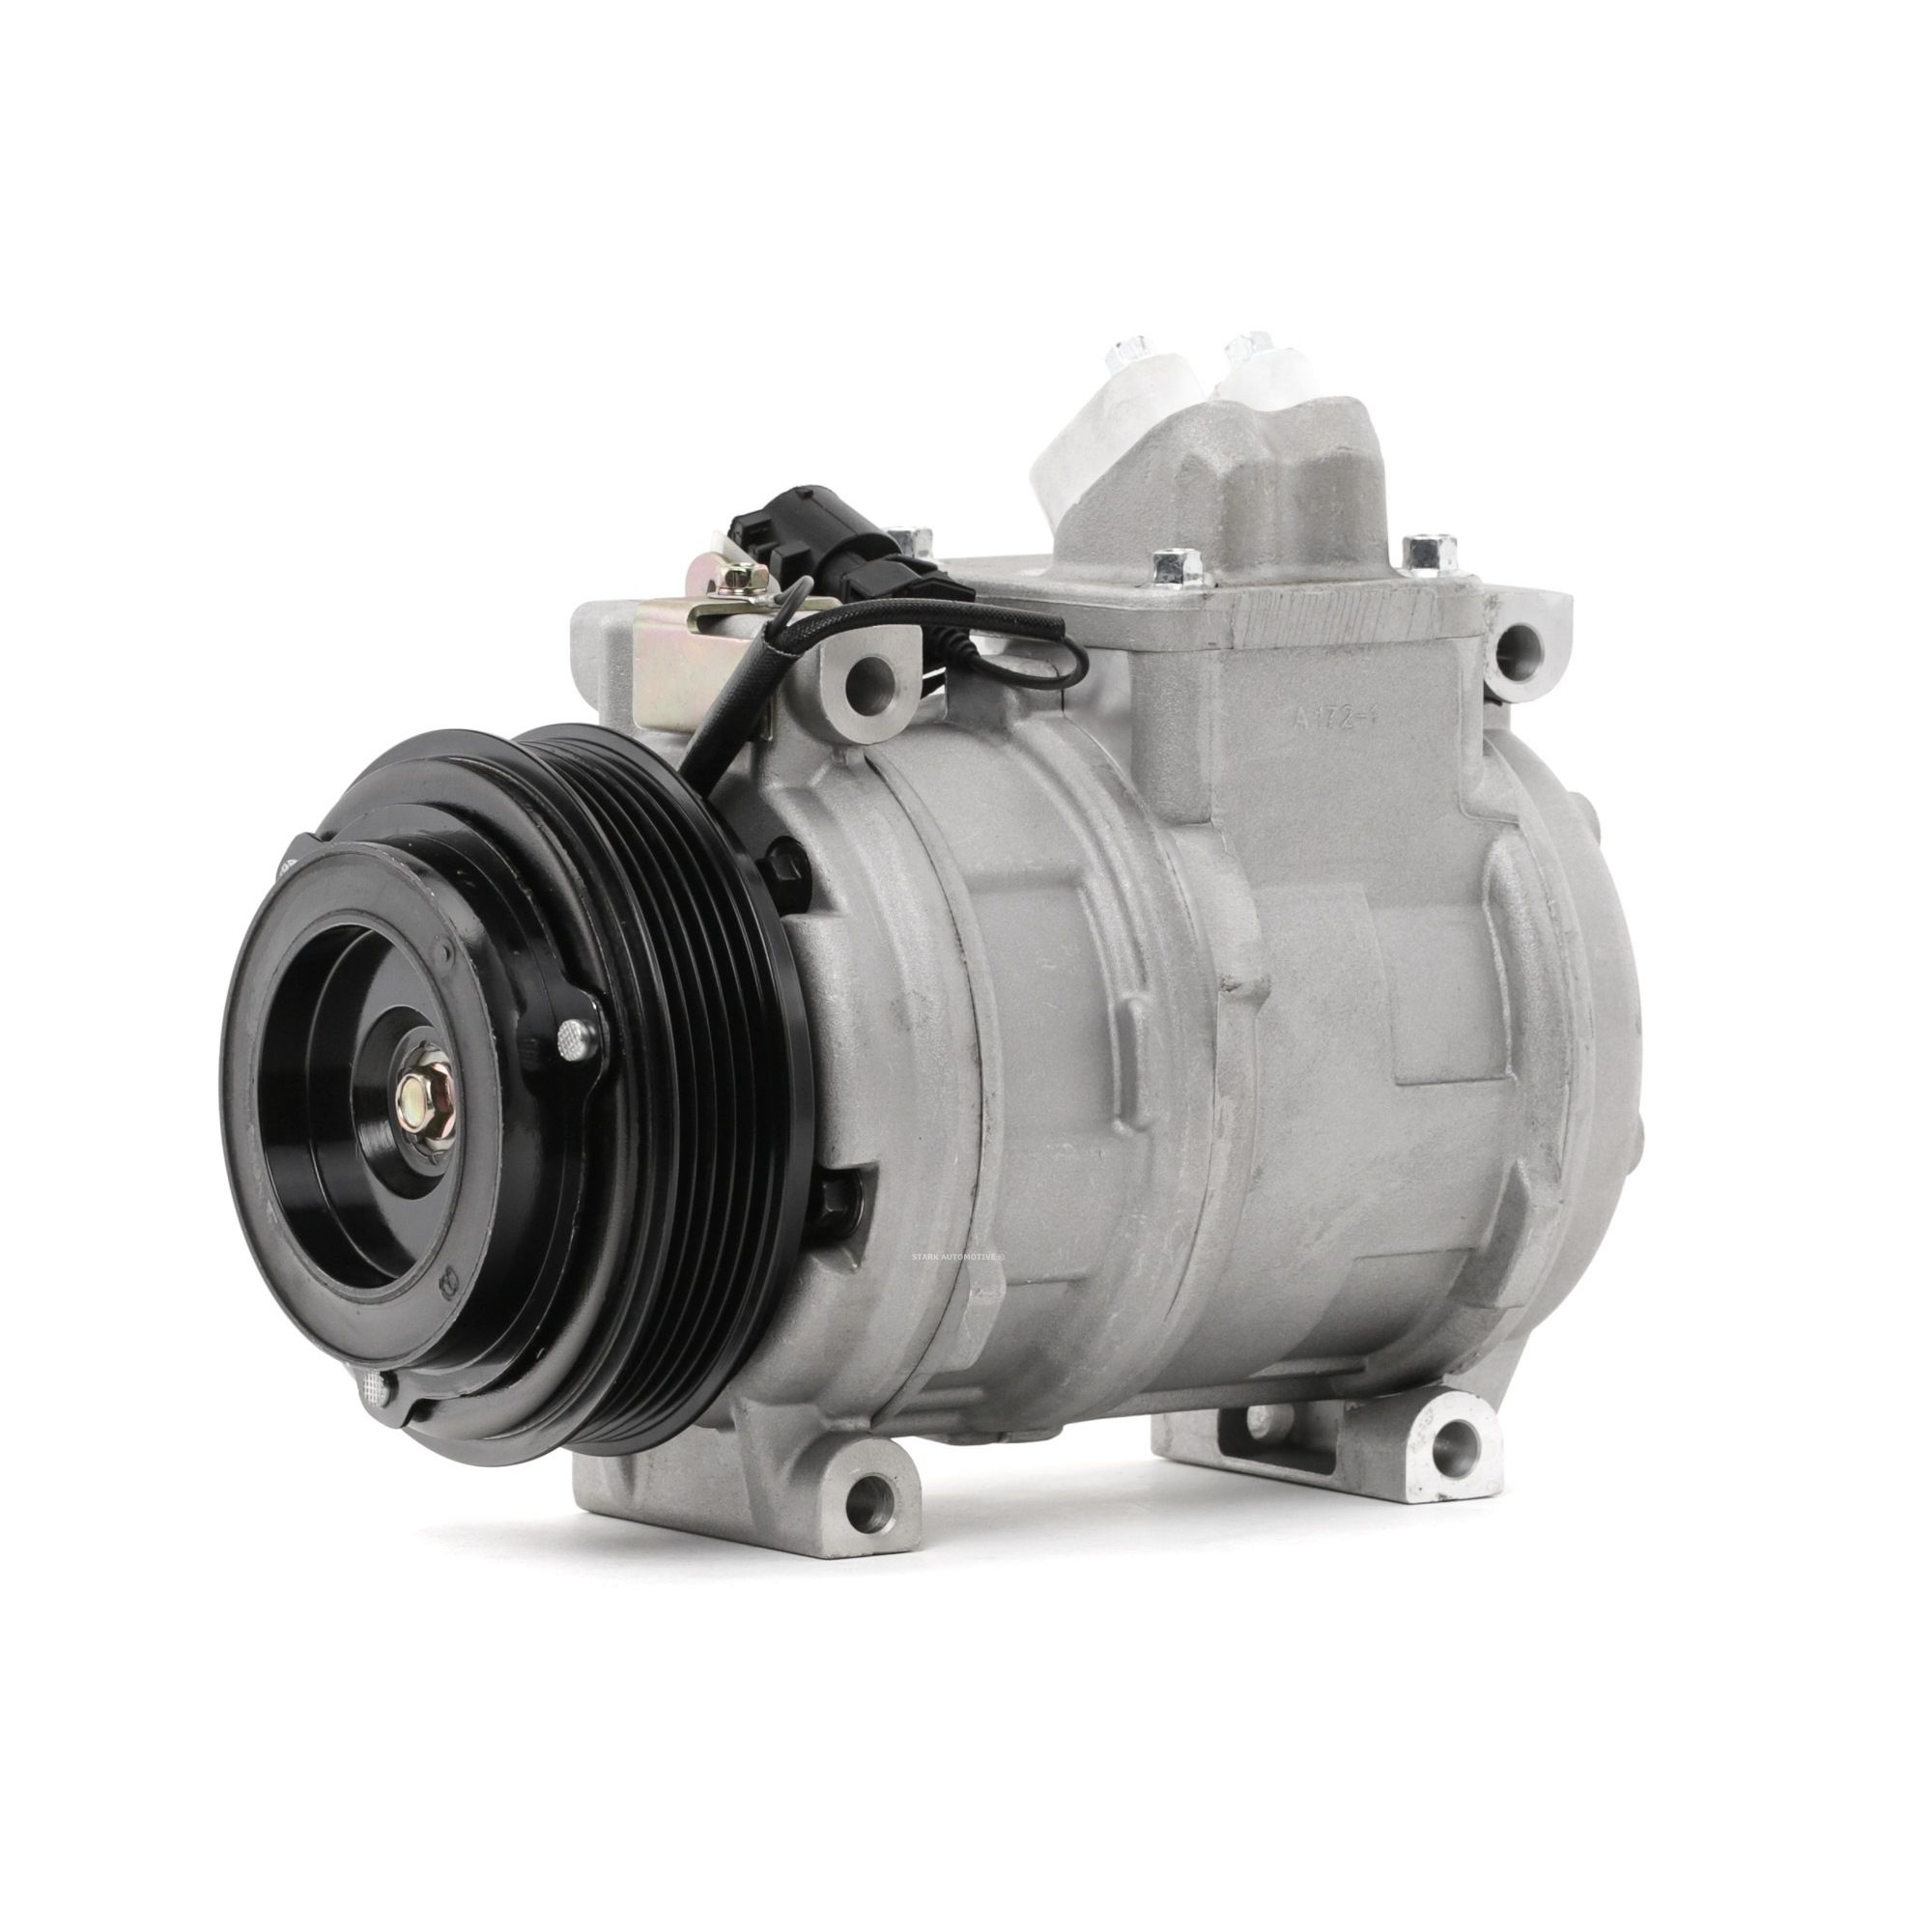 STARK SKKM-0340240 Air conditioning compressor 10PA17, 12V, PAG 46, R 134a, with PAG compressor oil